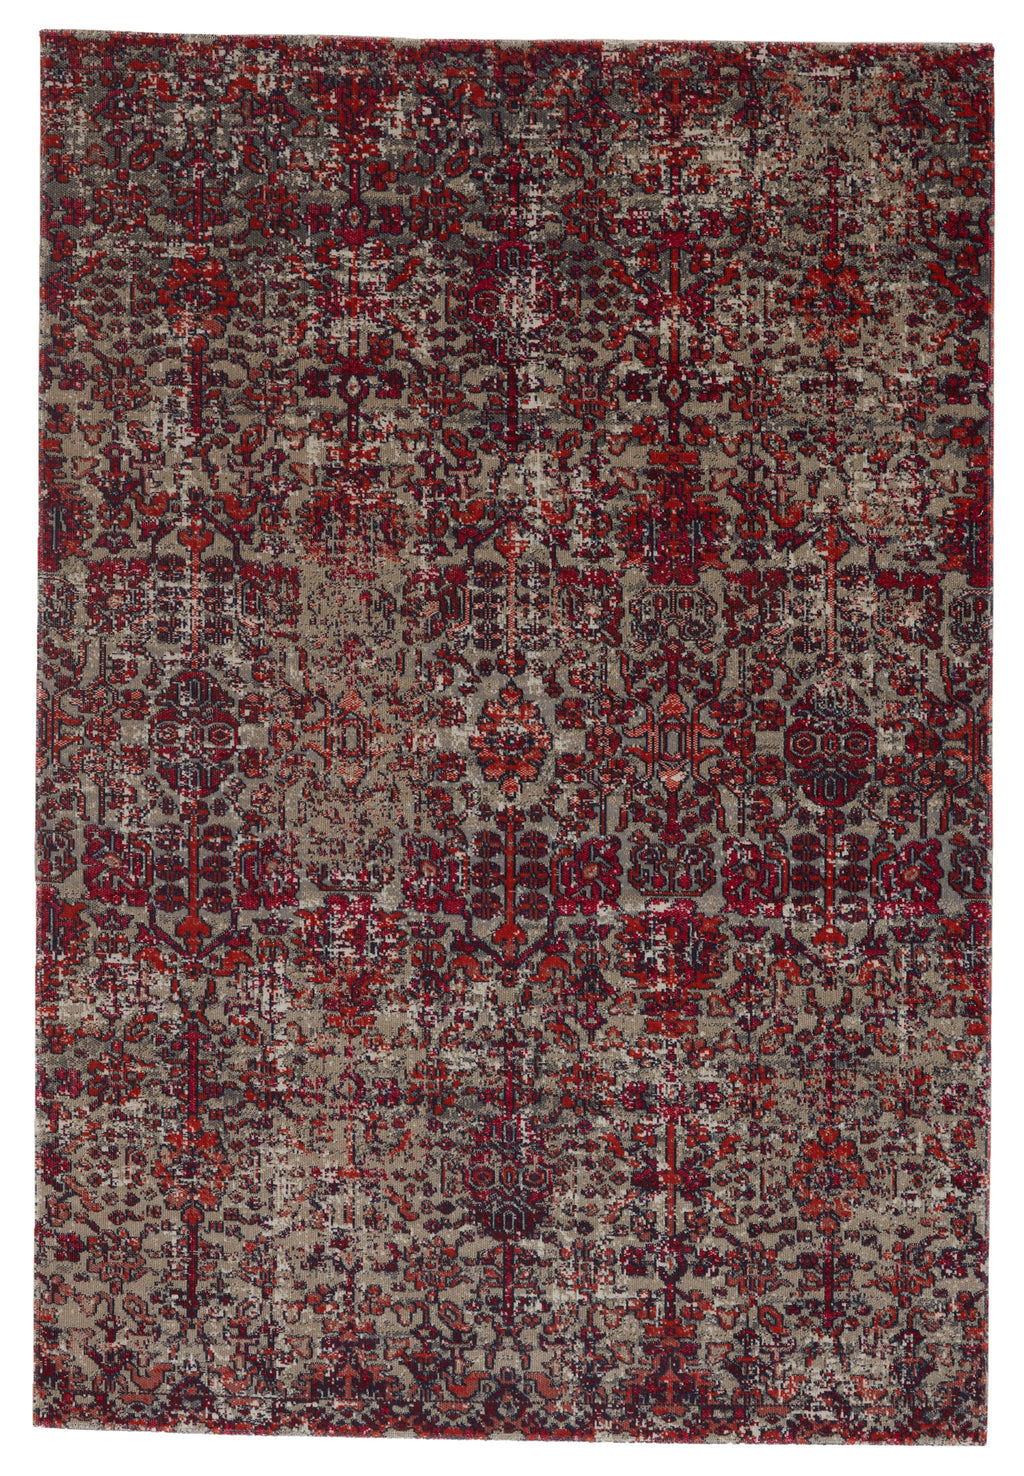 Bodega Indoor/Outdoor Trellis Rug in Red & Gray by Jaipur Living